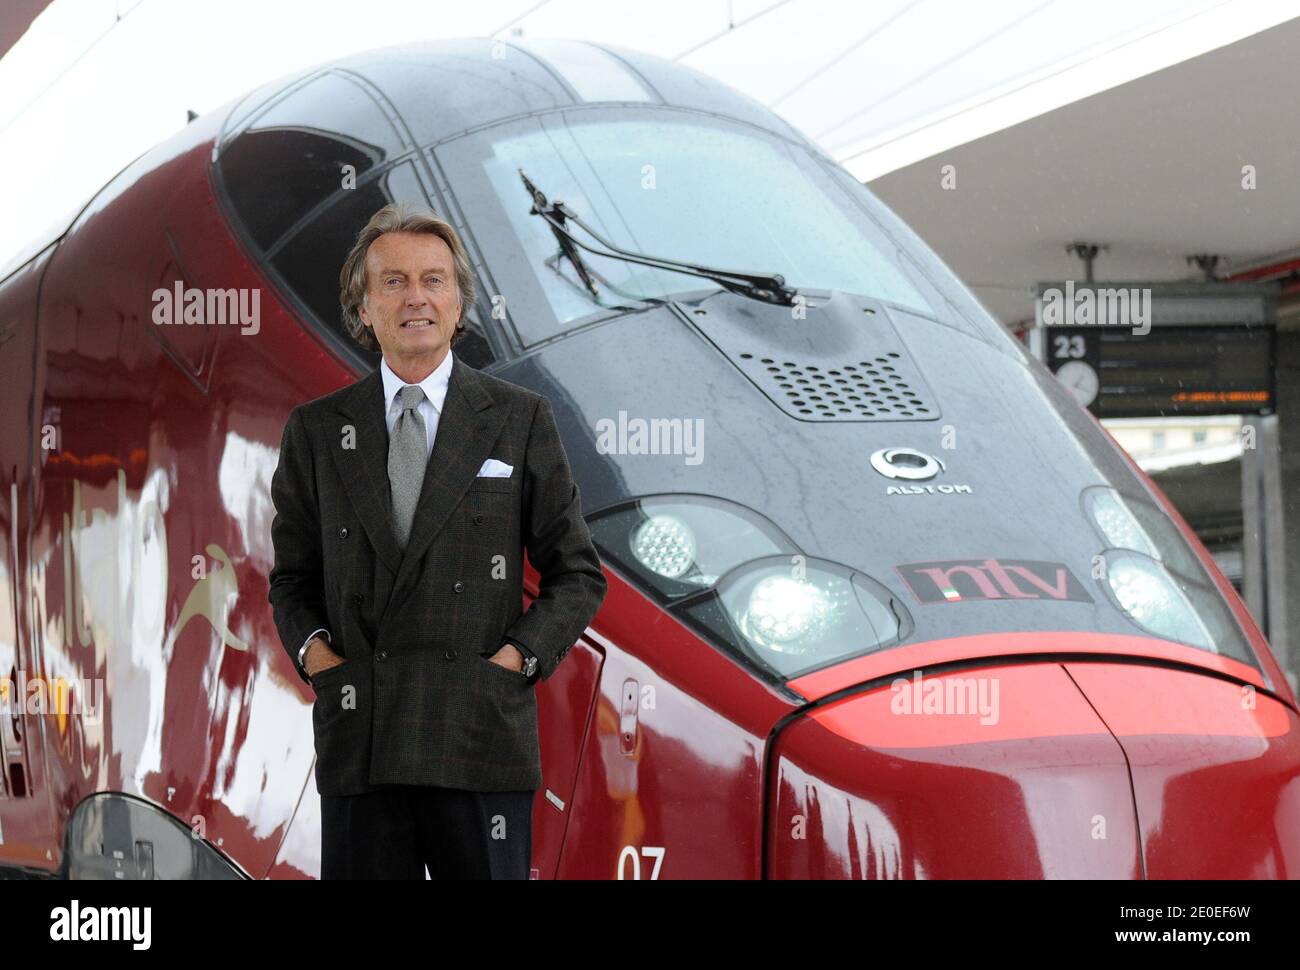 President Luca Cordero di Montezemolo, in front of the high speed train Italo, in Naples railway station, on the occasion of the inaugural trip to Naples, Italy, April 20, 2012. Named 'Italo' , Italy's first private high-speed train is the Europe's most modern train. Launched by Ferrari head Luca di Montezemolo's company NTV it made its inaugural journey from Rome to Naples. 'Italo' travels at a top speed of 360 km per hours. NTV, is a euro900 million project that will link Rome, Milan, Turin, Venice, Florence, Bologna, Naples, Bari and Salerno. It has three different coach classes. Photo by A Stock Photo